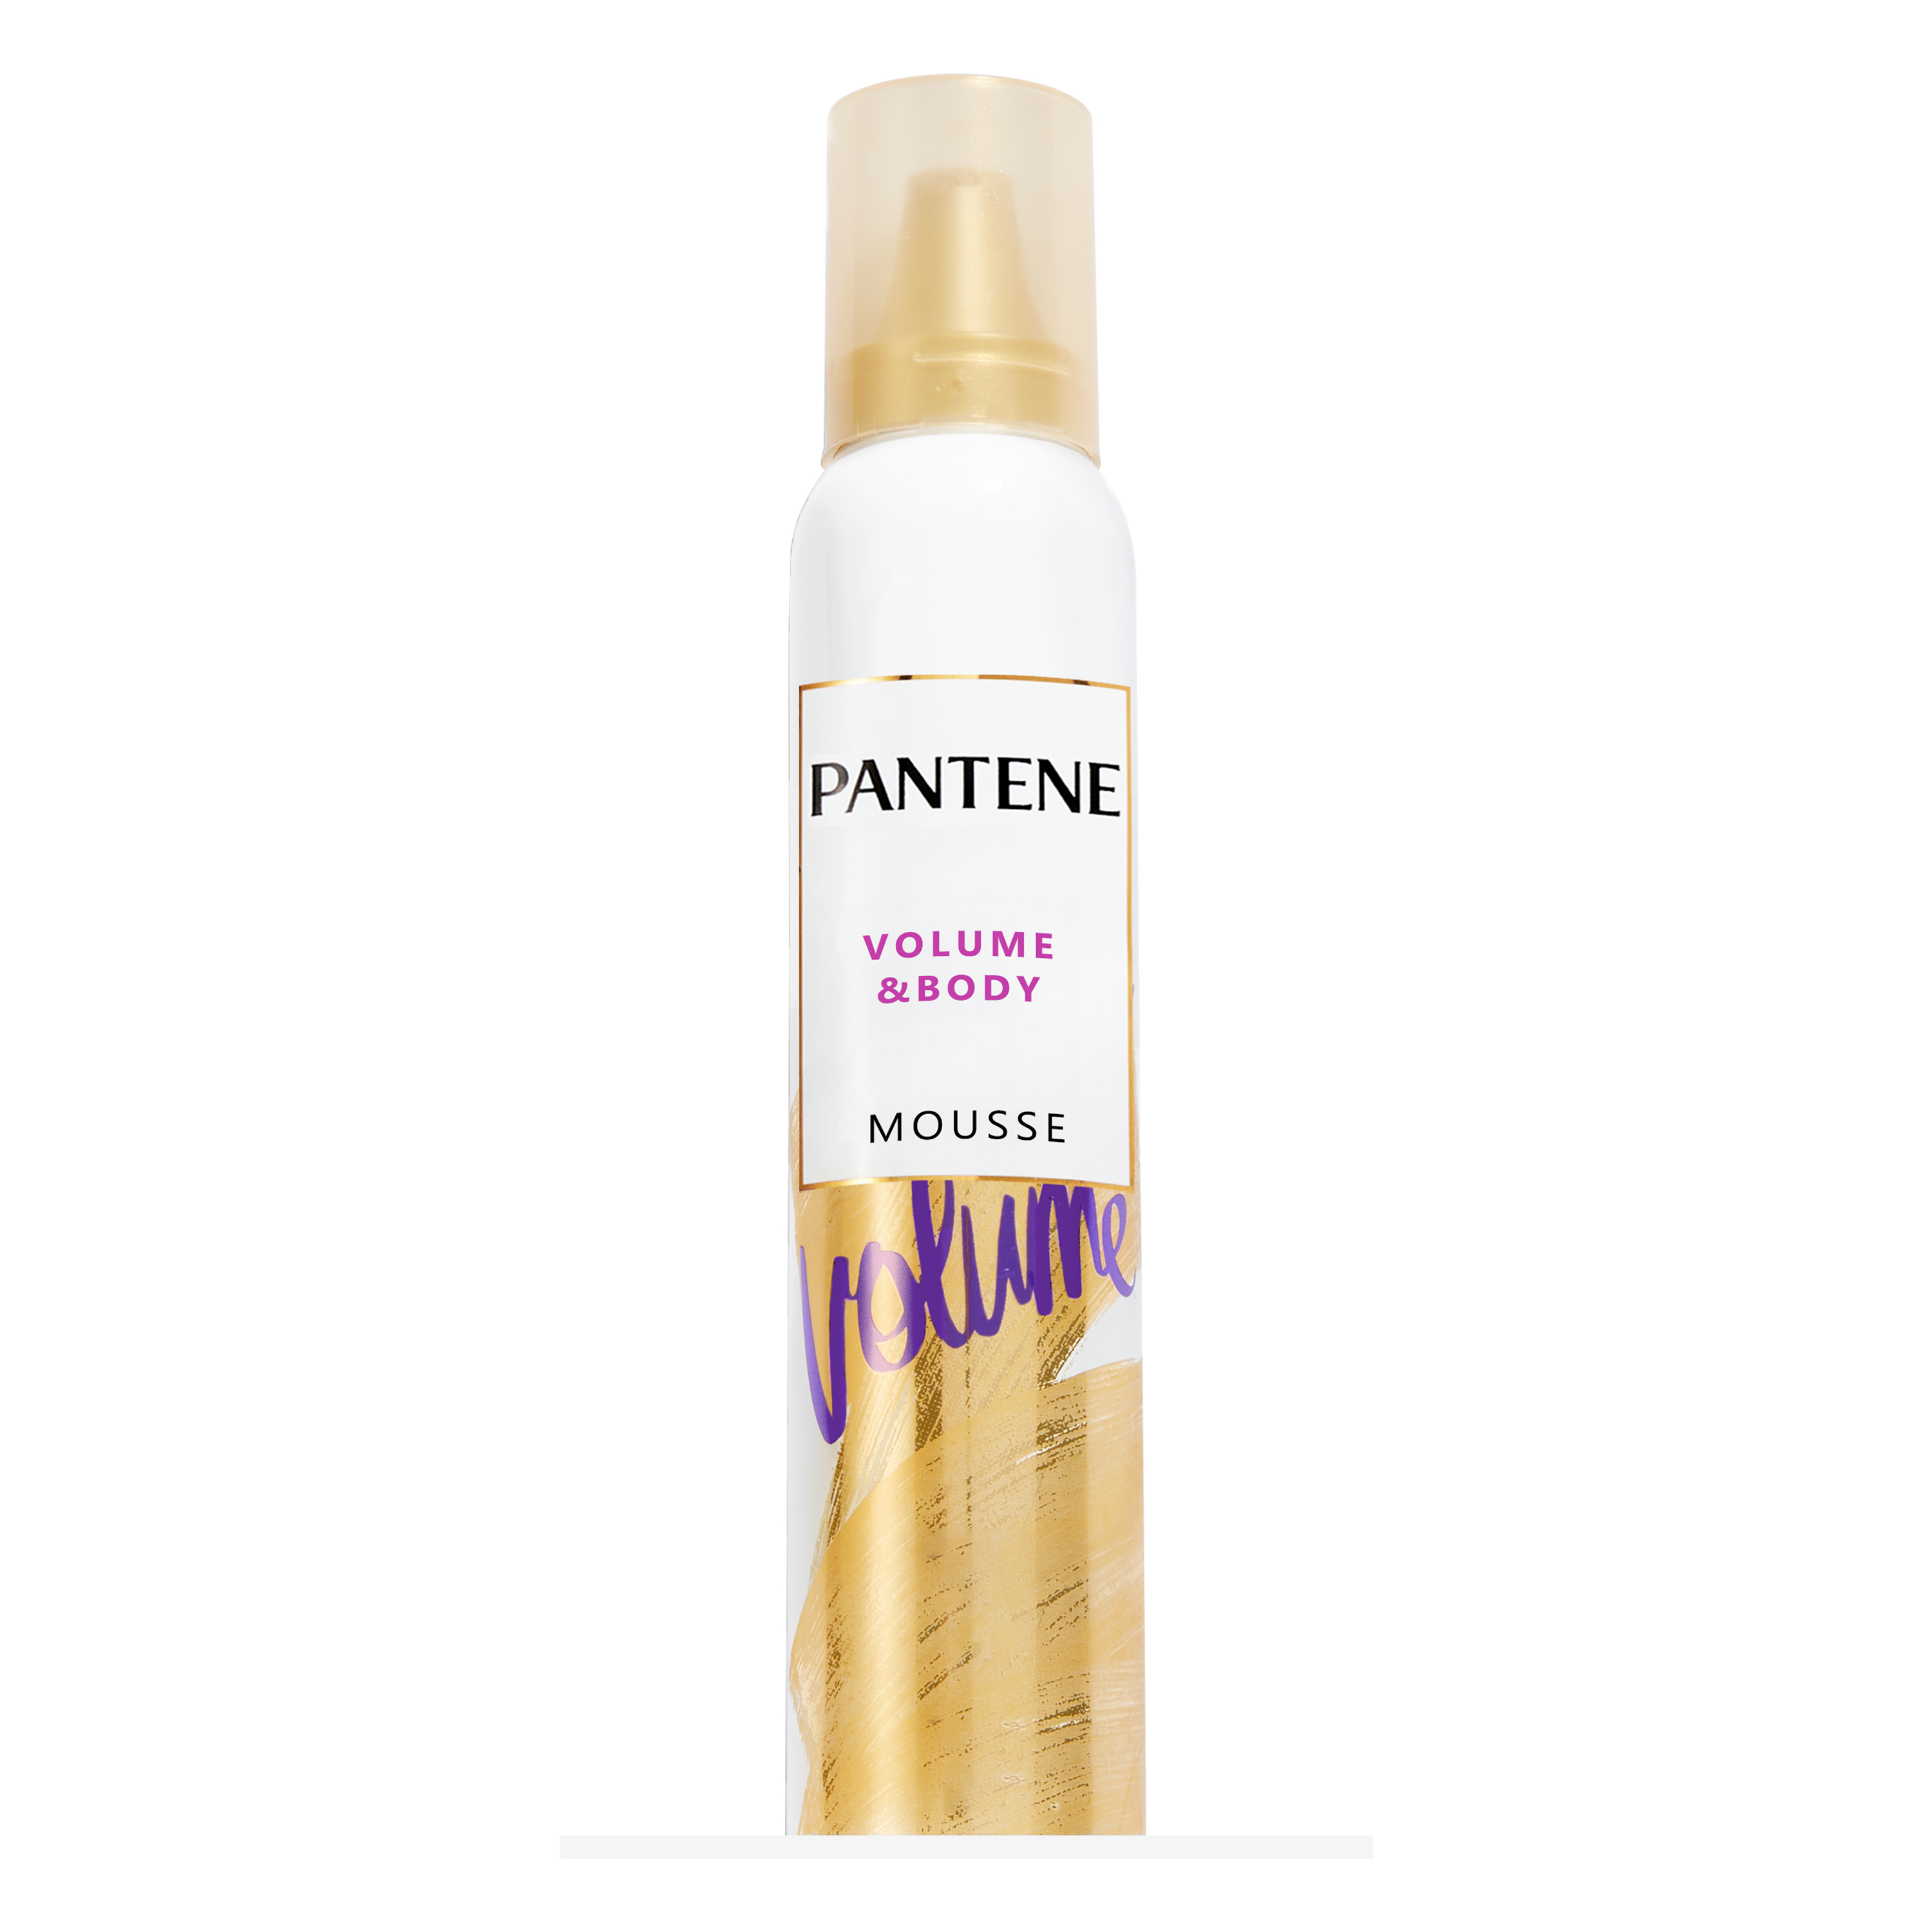 Pantene Volume Mousse, Boosts Fine Flat Hair for Max Fullness, 6.6 oz - image 1 of 12